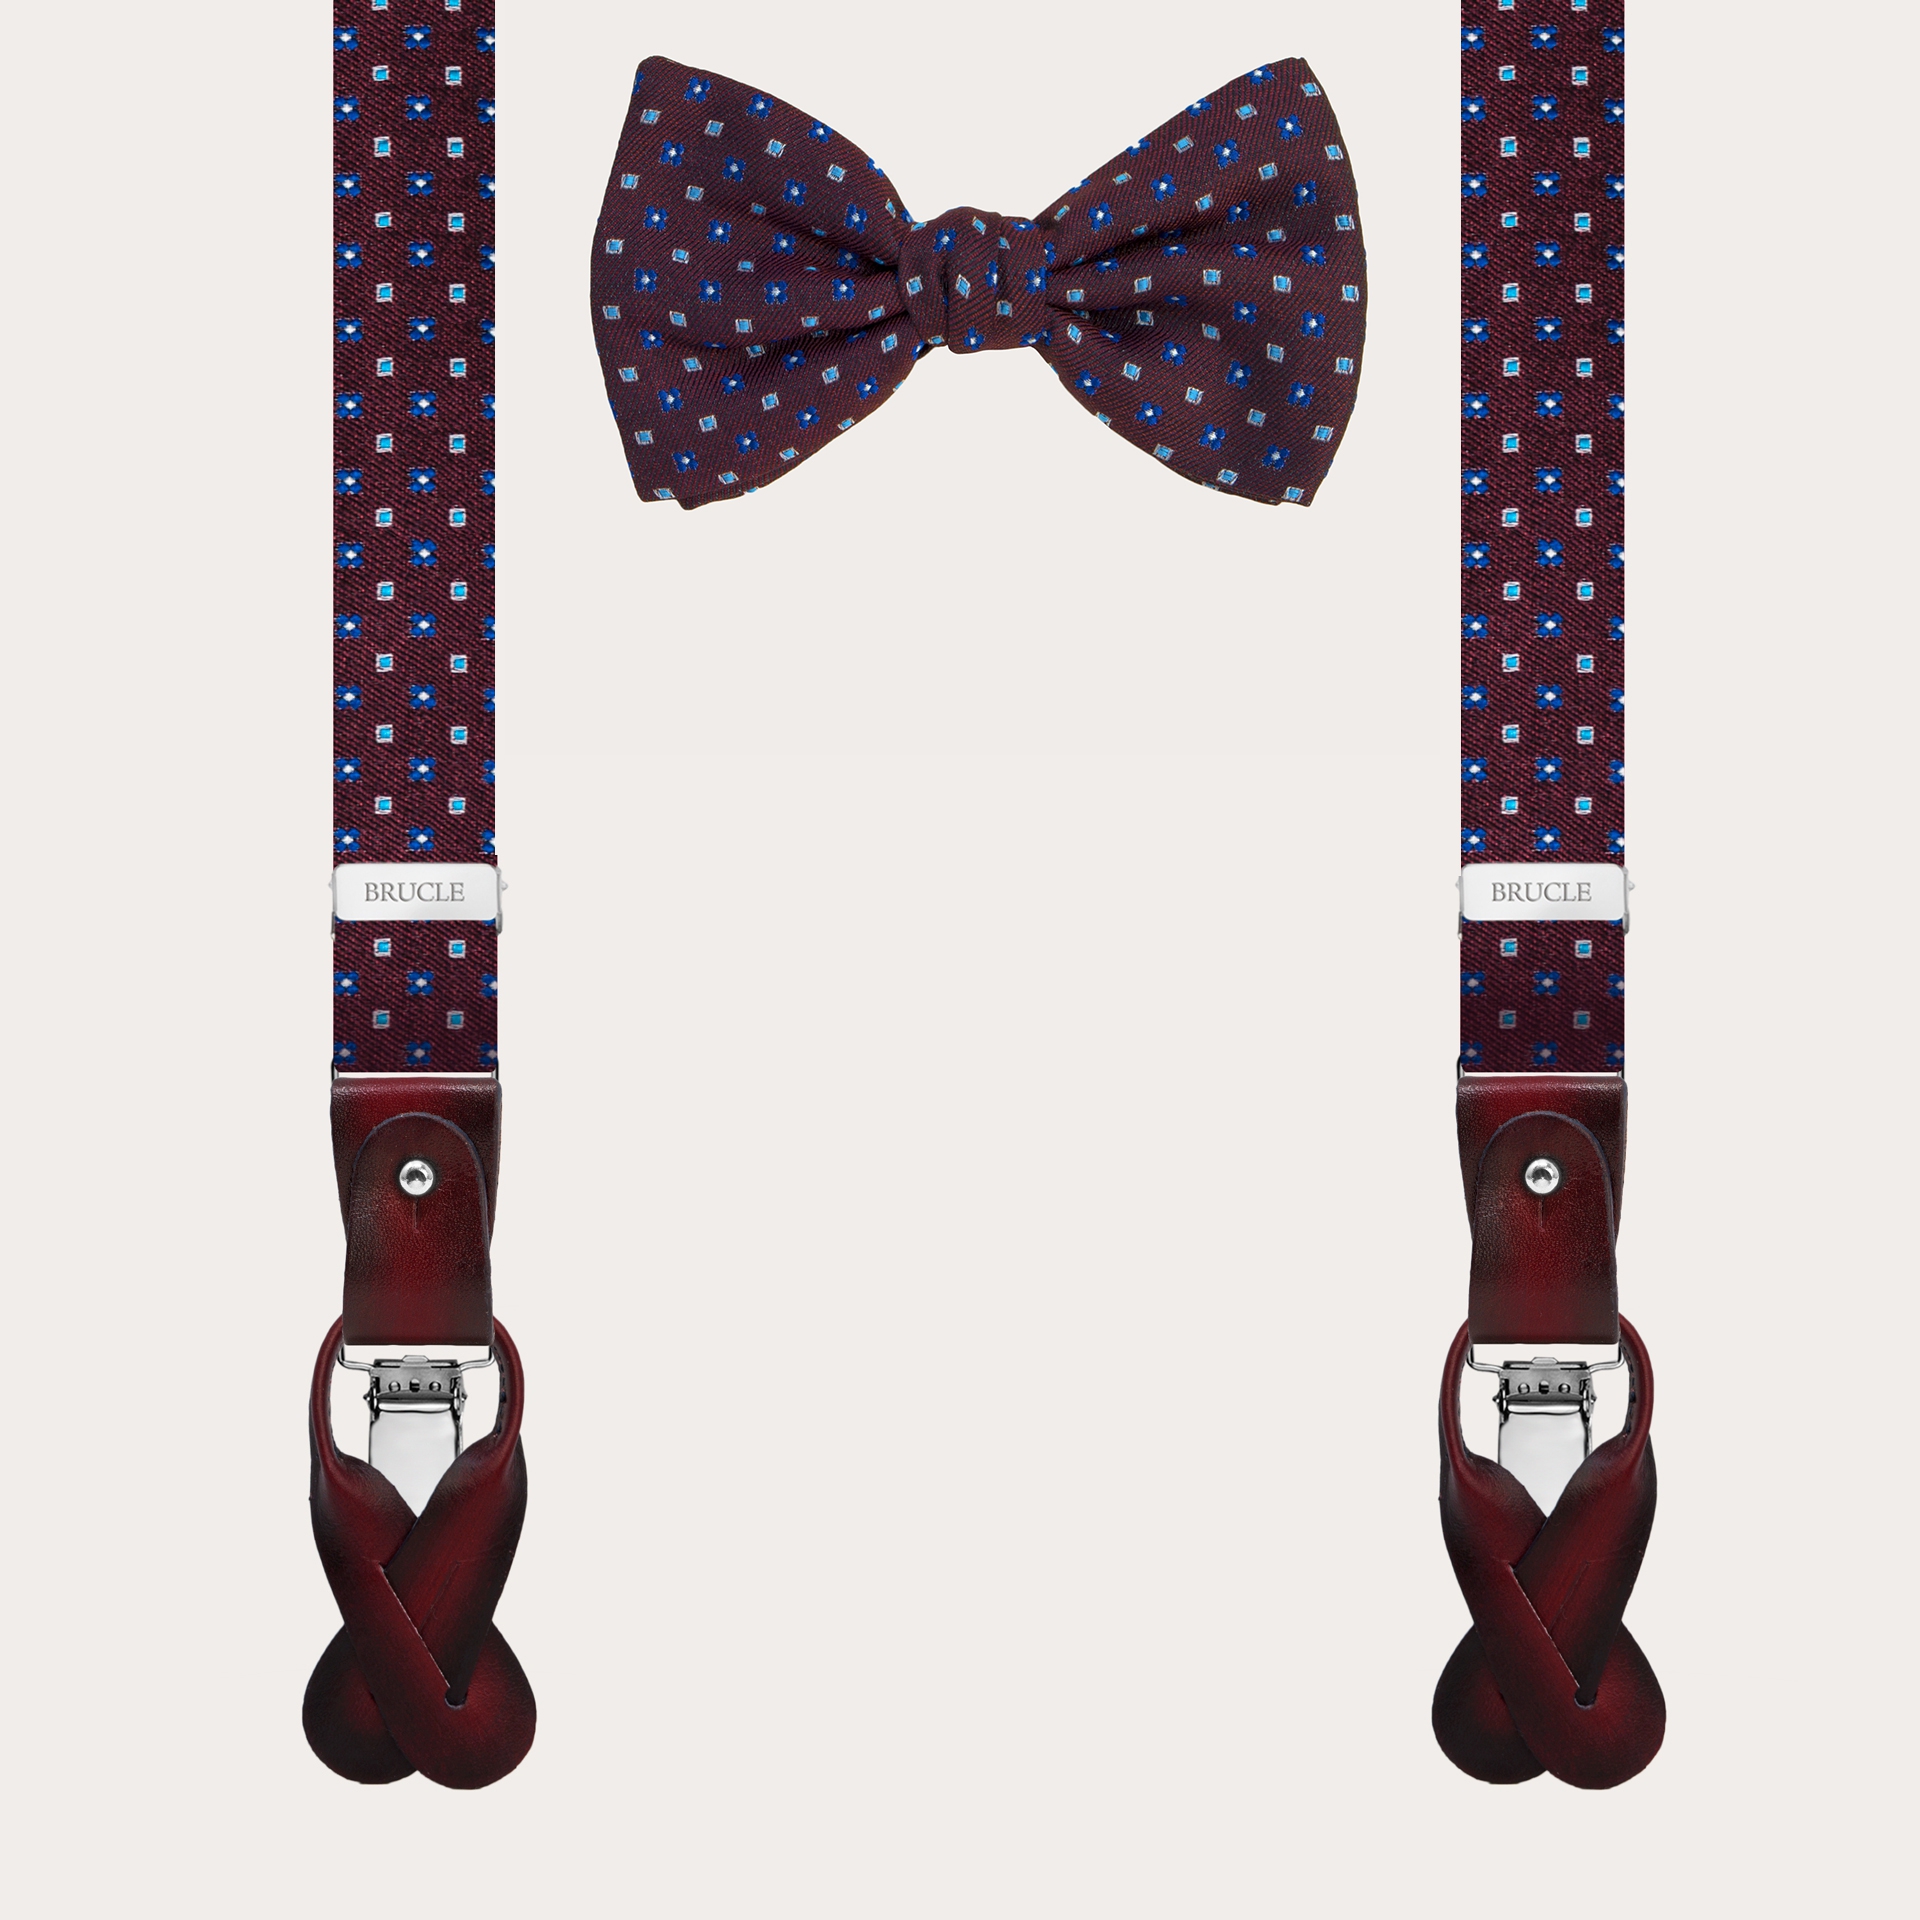 BRUCLE Suspenders and matching bow tie in burgundy floral patterned silk